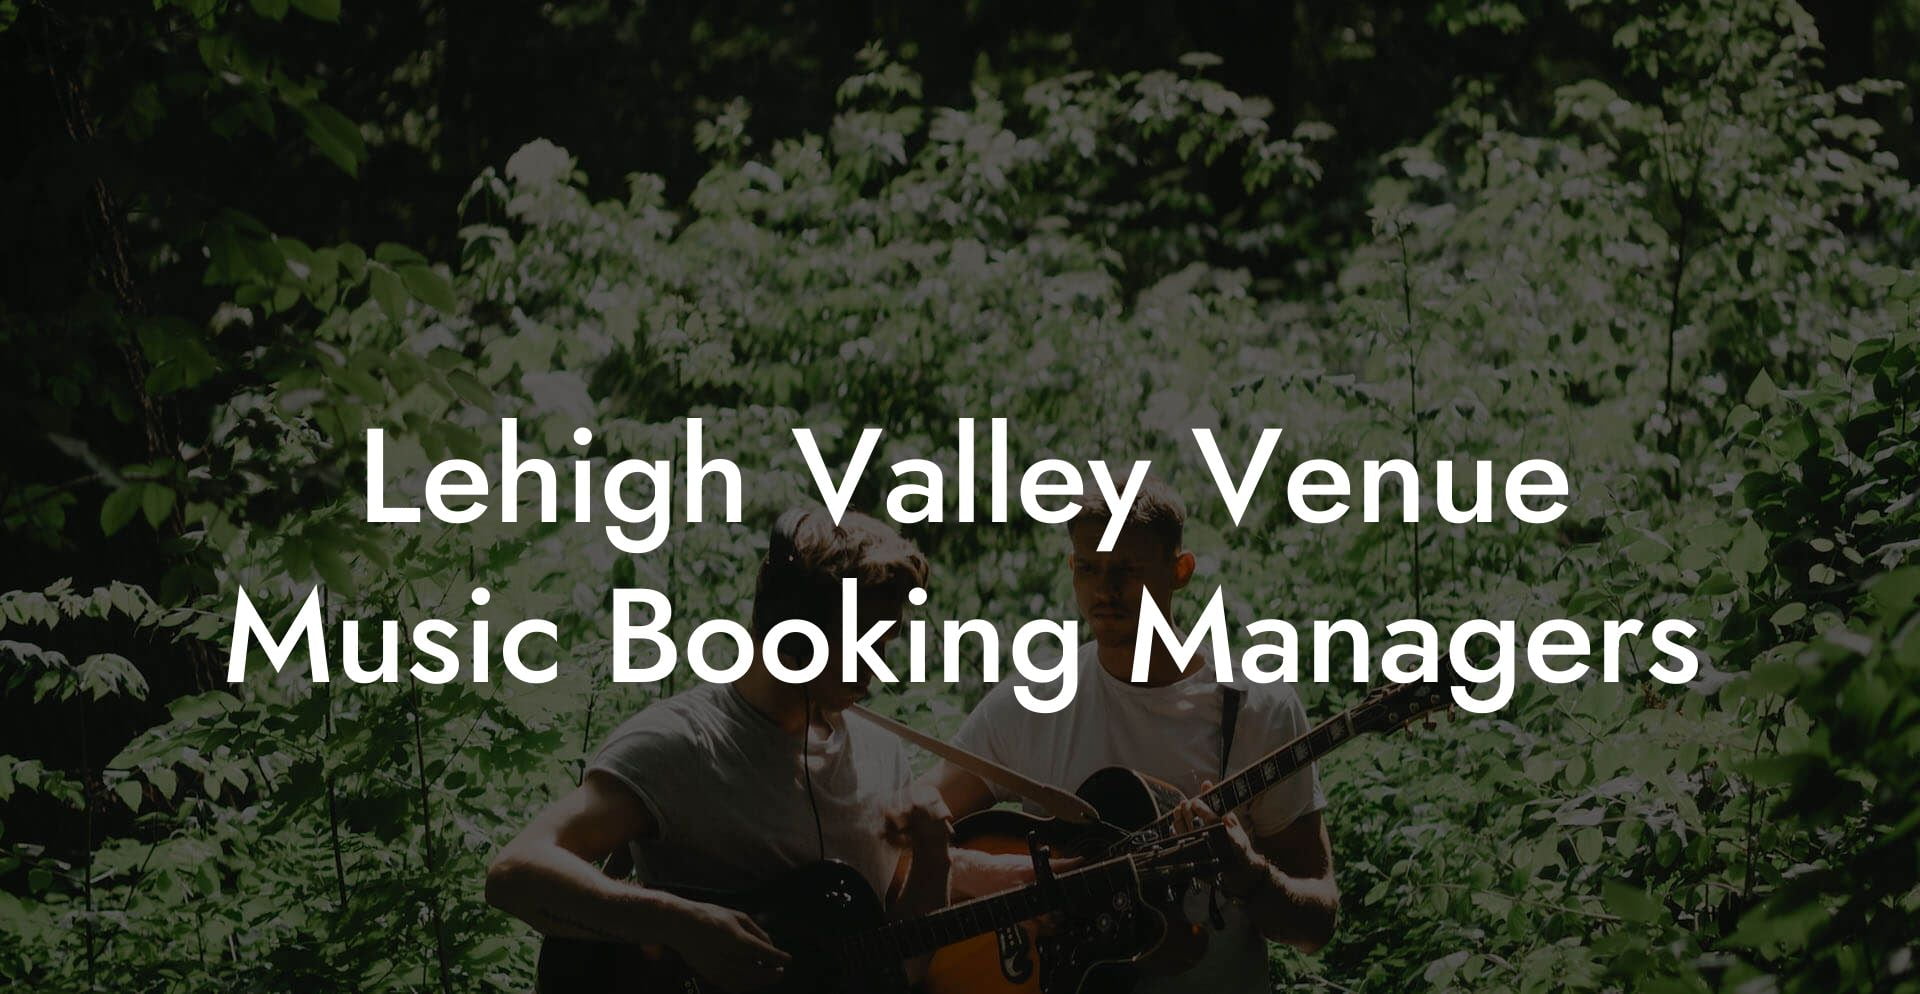 Lehigh Valley Venue Music Booking Managers